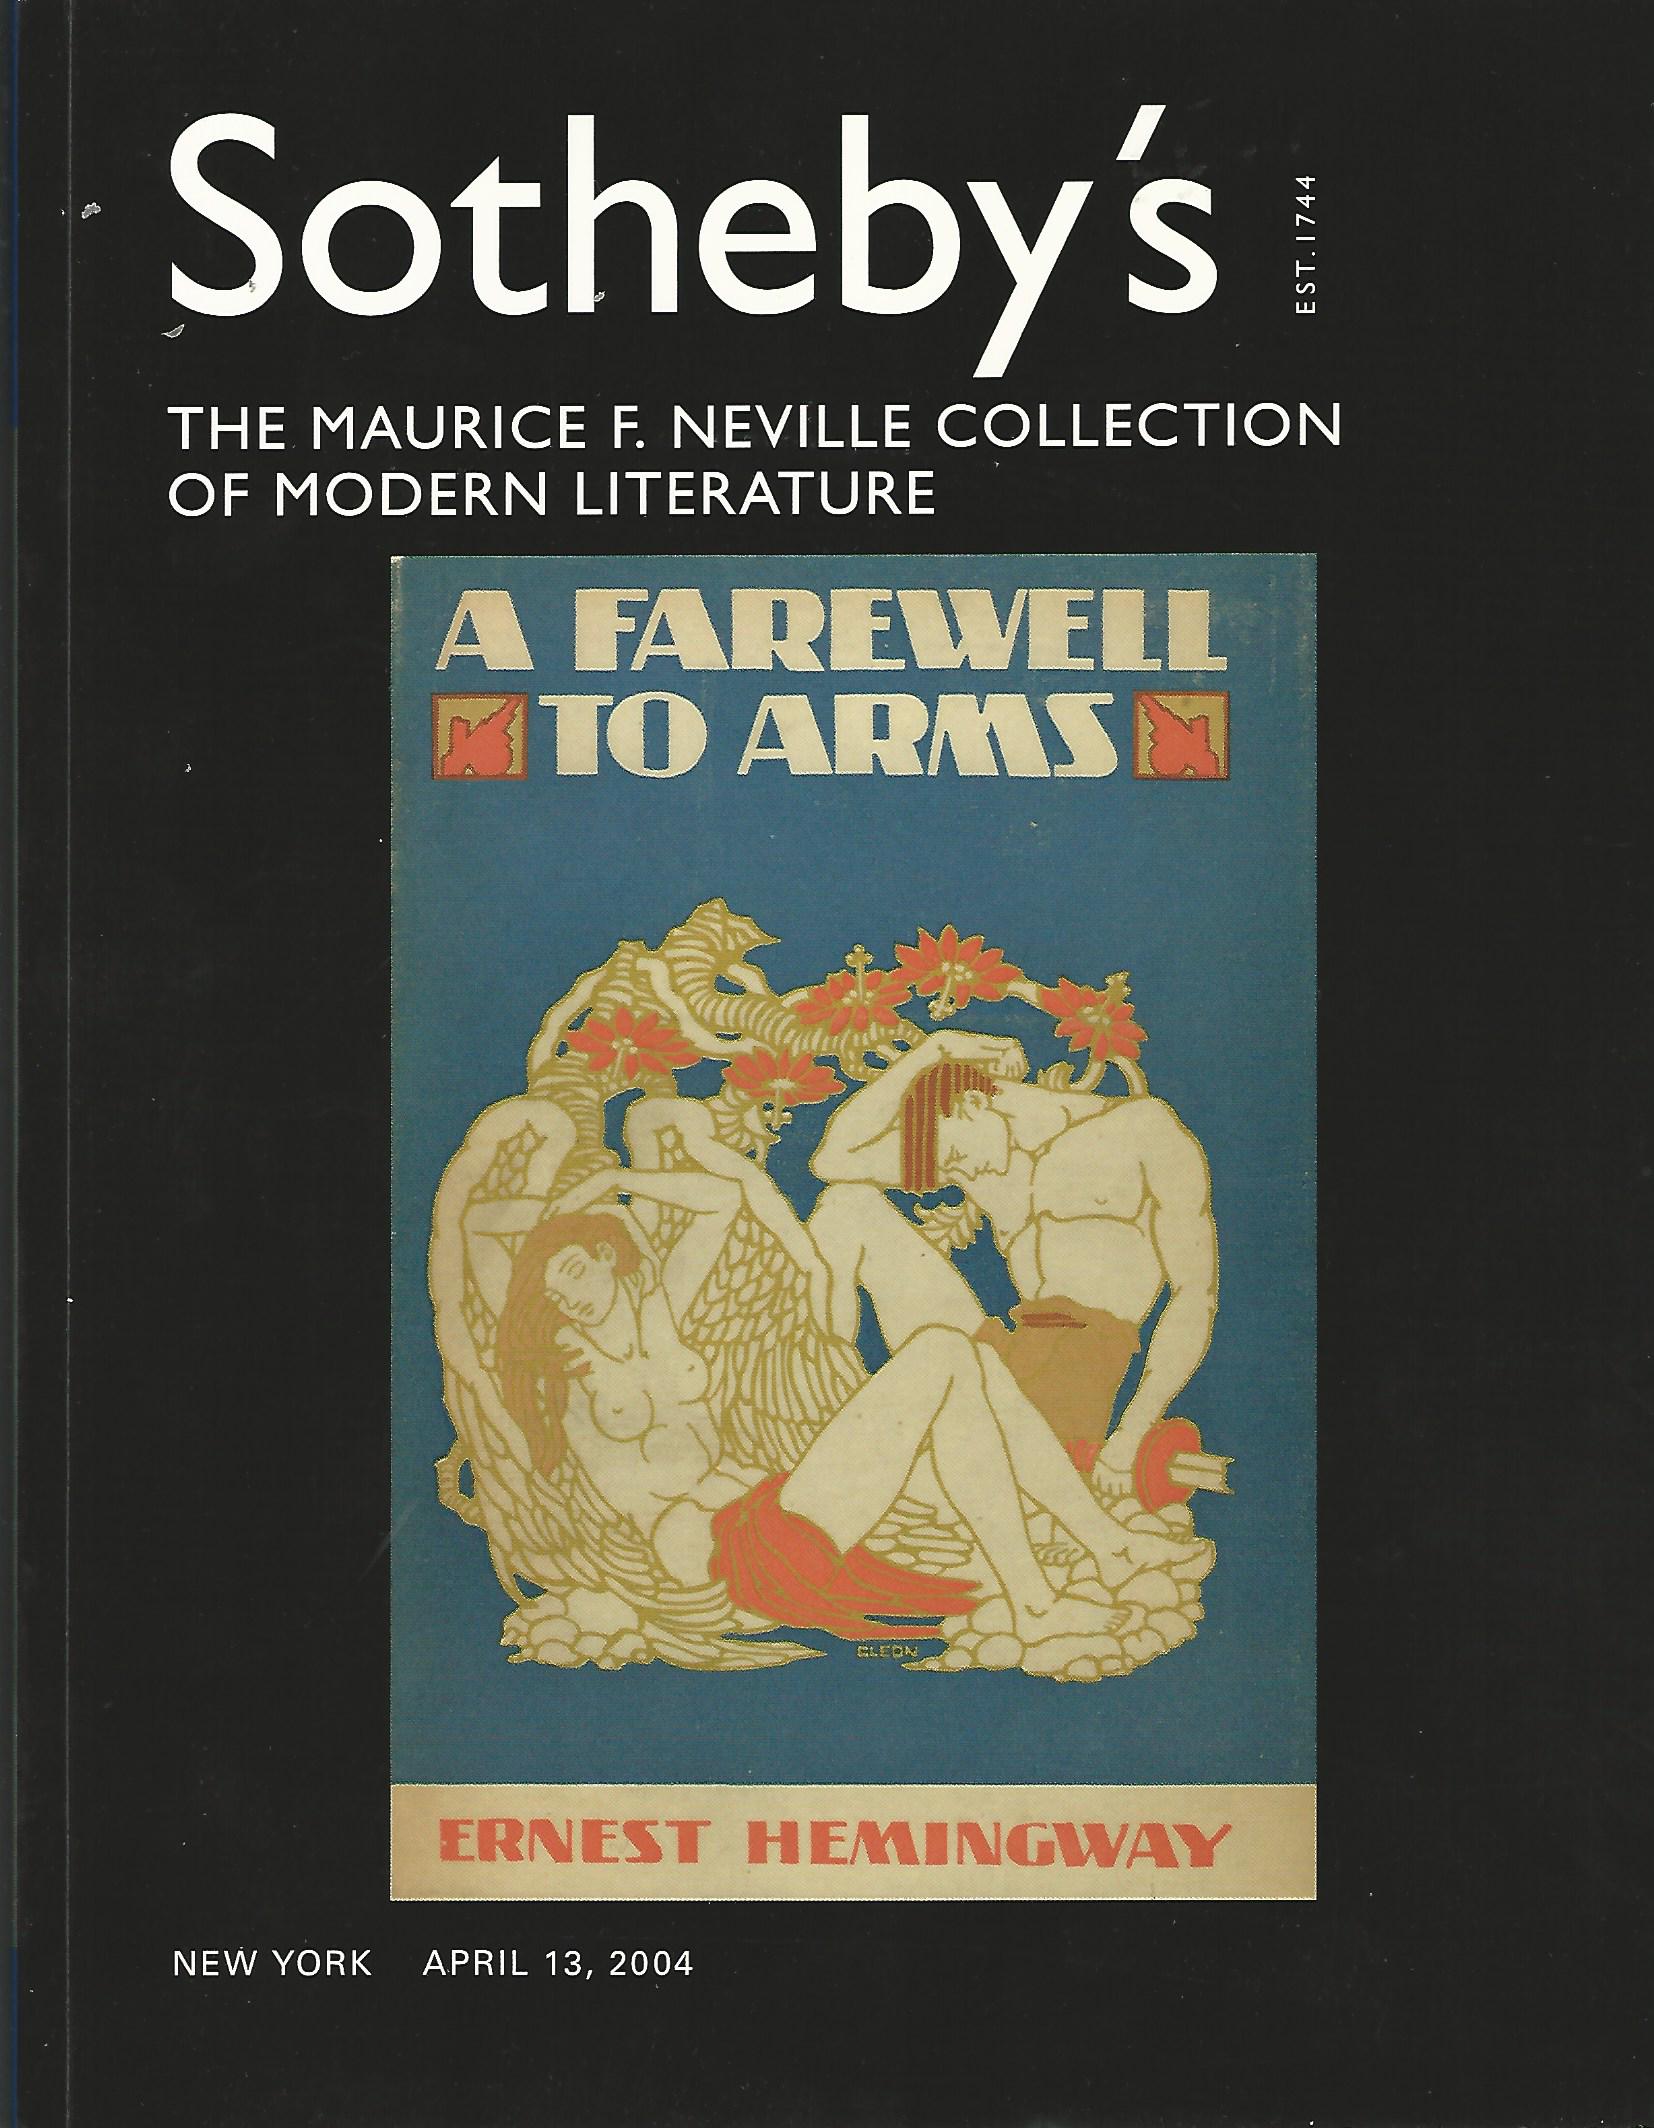 Sotheby's: The Maurice F. Neville Collection of Modern Literature.